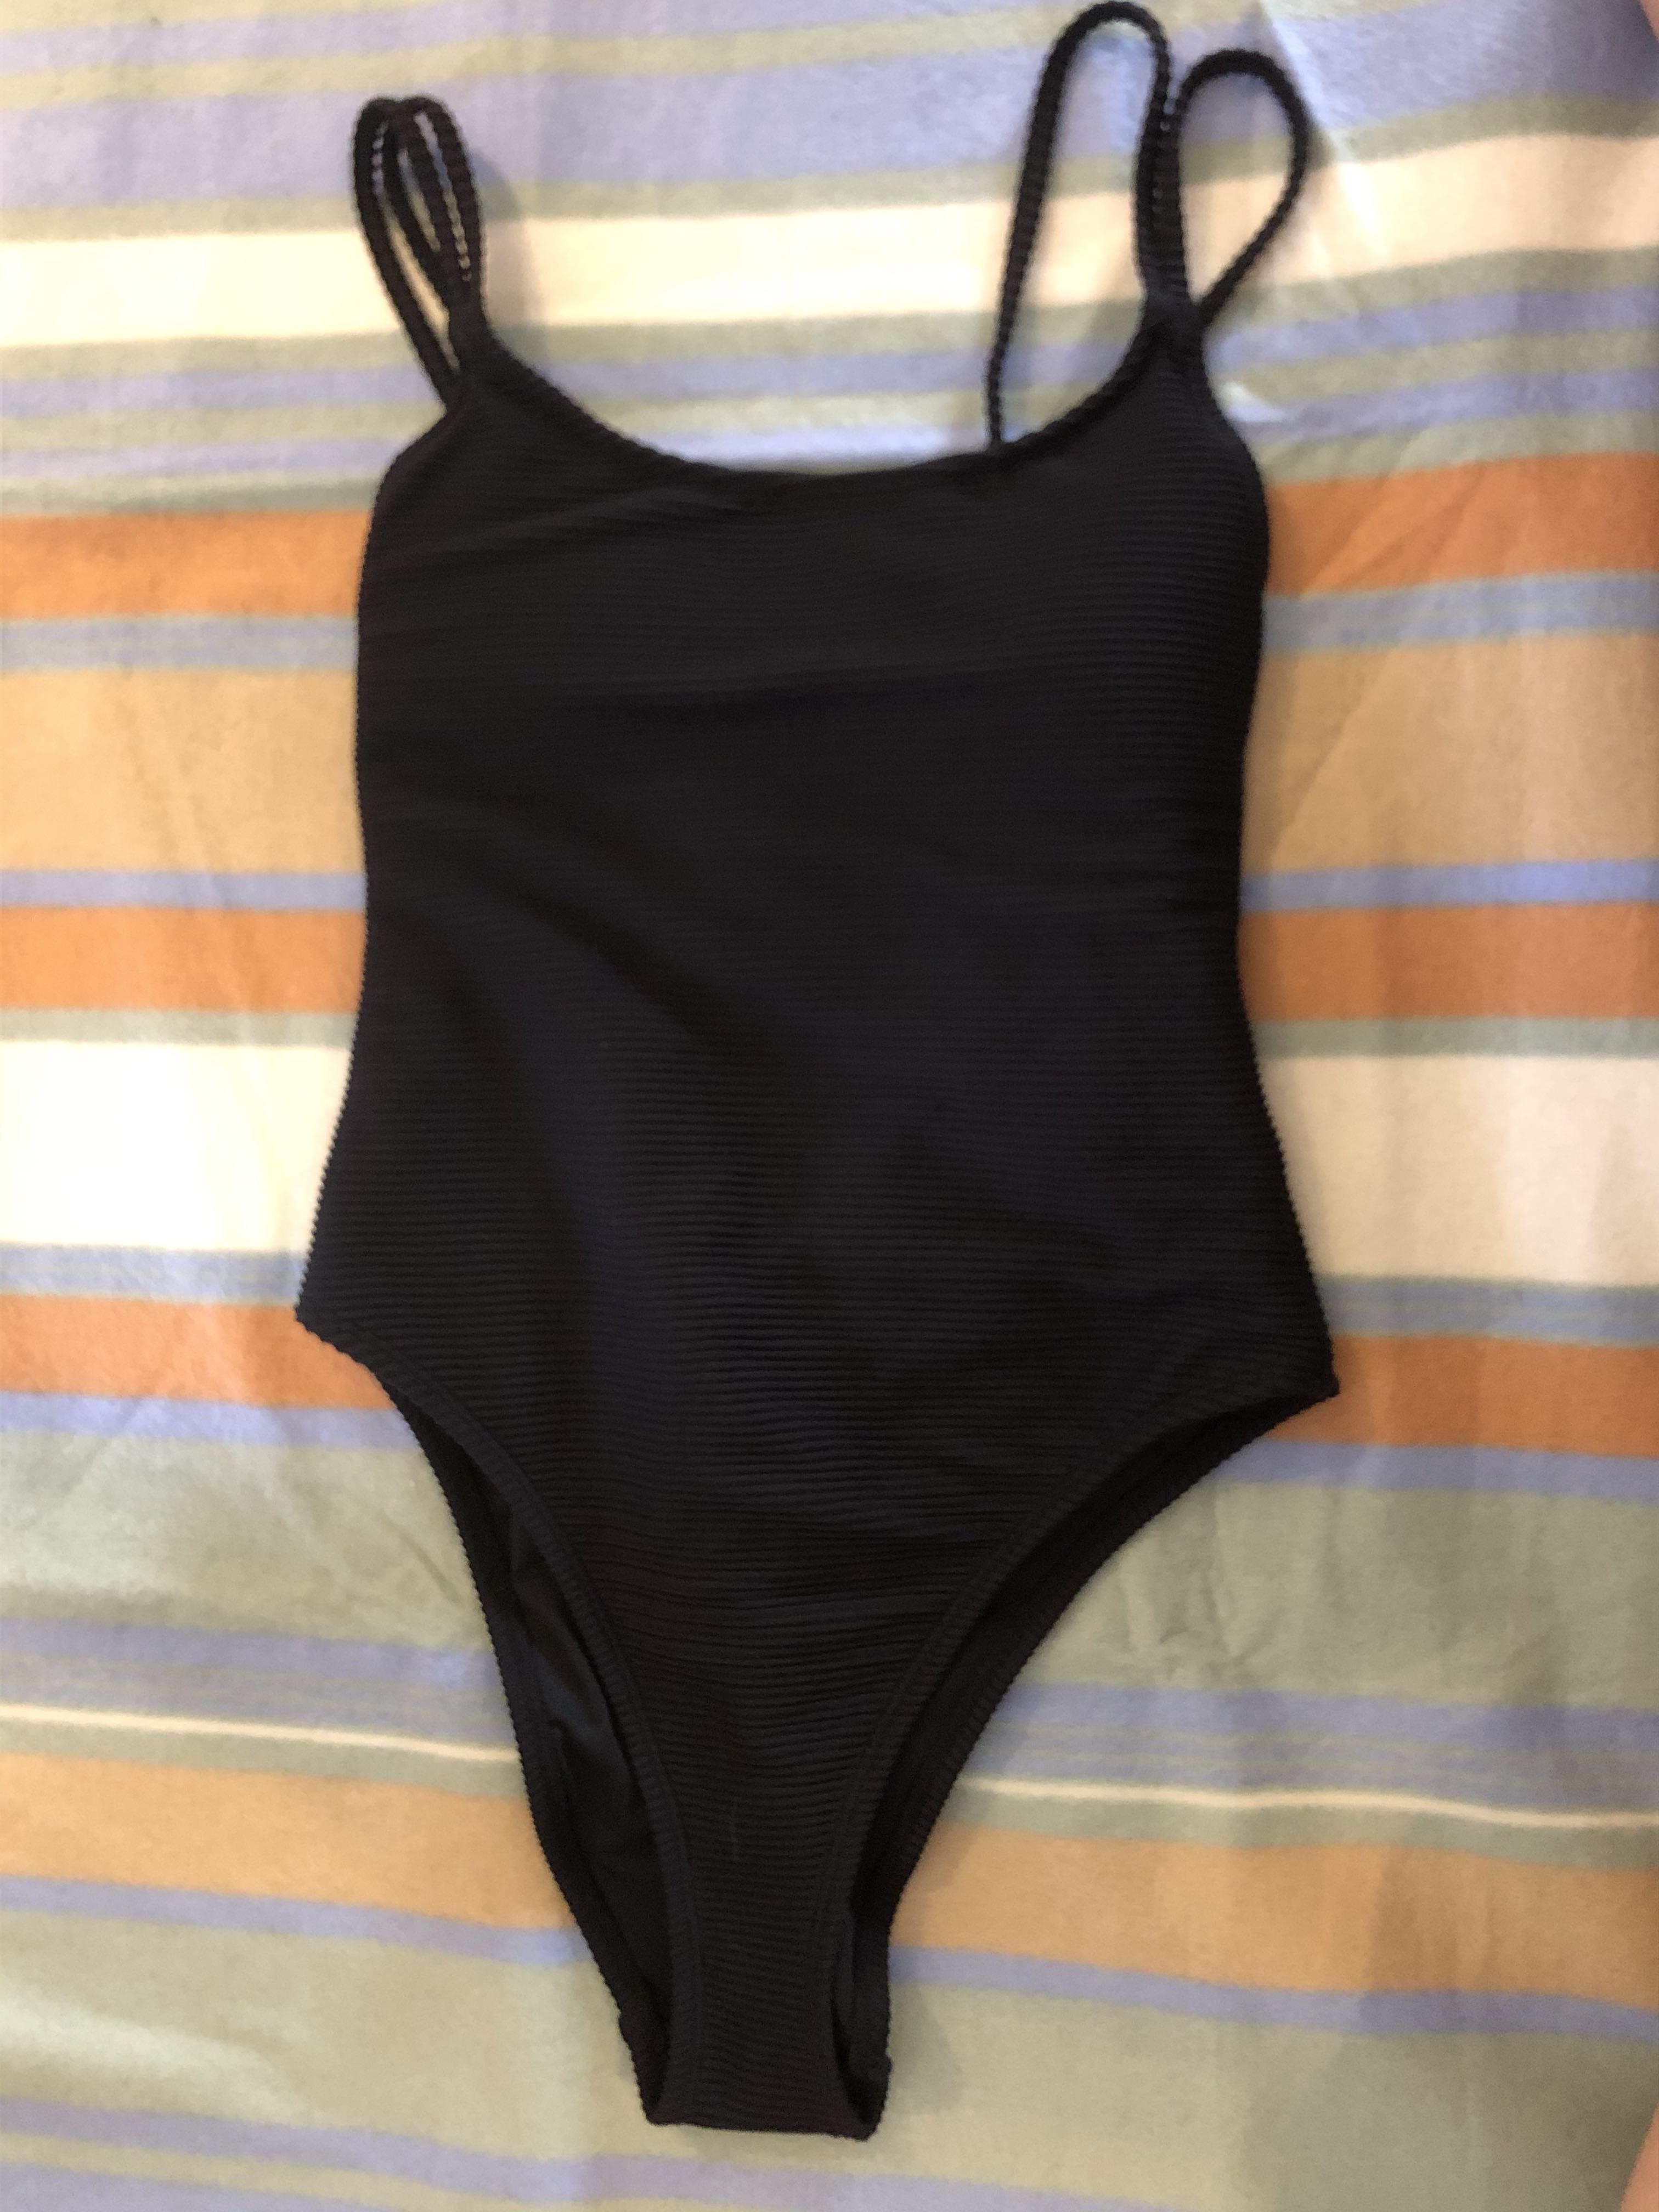 Forever 21 Black One Piece Swimsuit Women S Fashion Clothes Others On Carousell